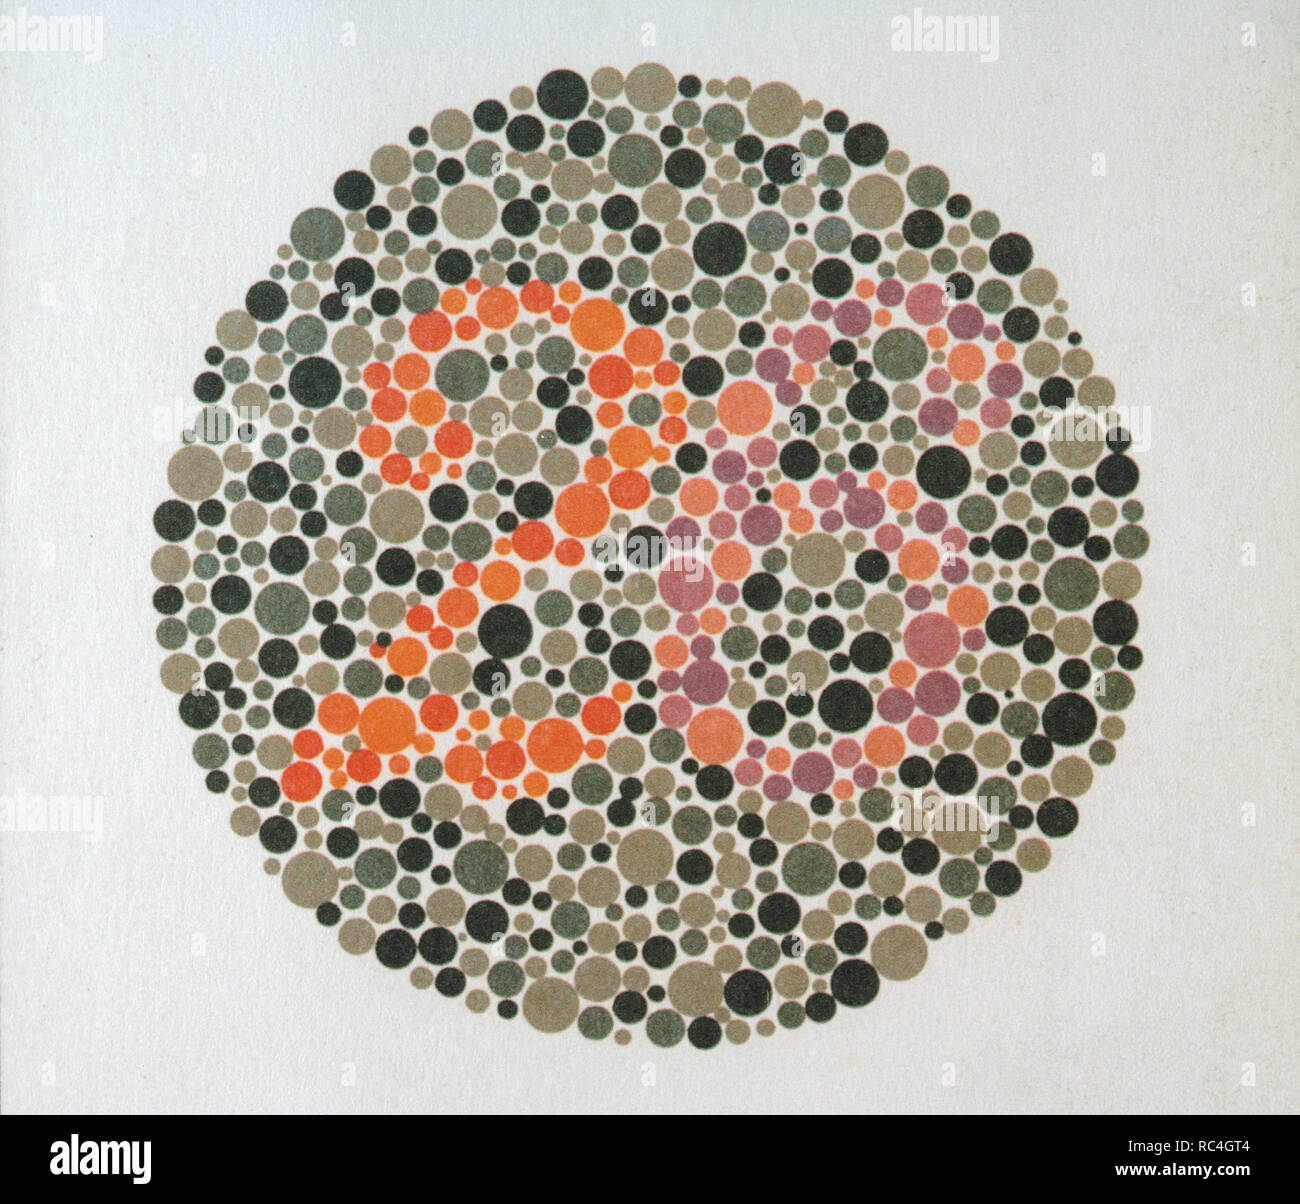 Ishihara test. Color perception test for red-green color deficiencies (color Blindness). Ishihara Plate No. 6 (26). Stock Photo